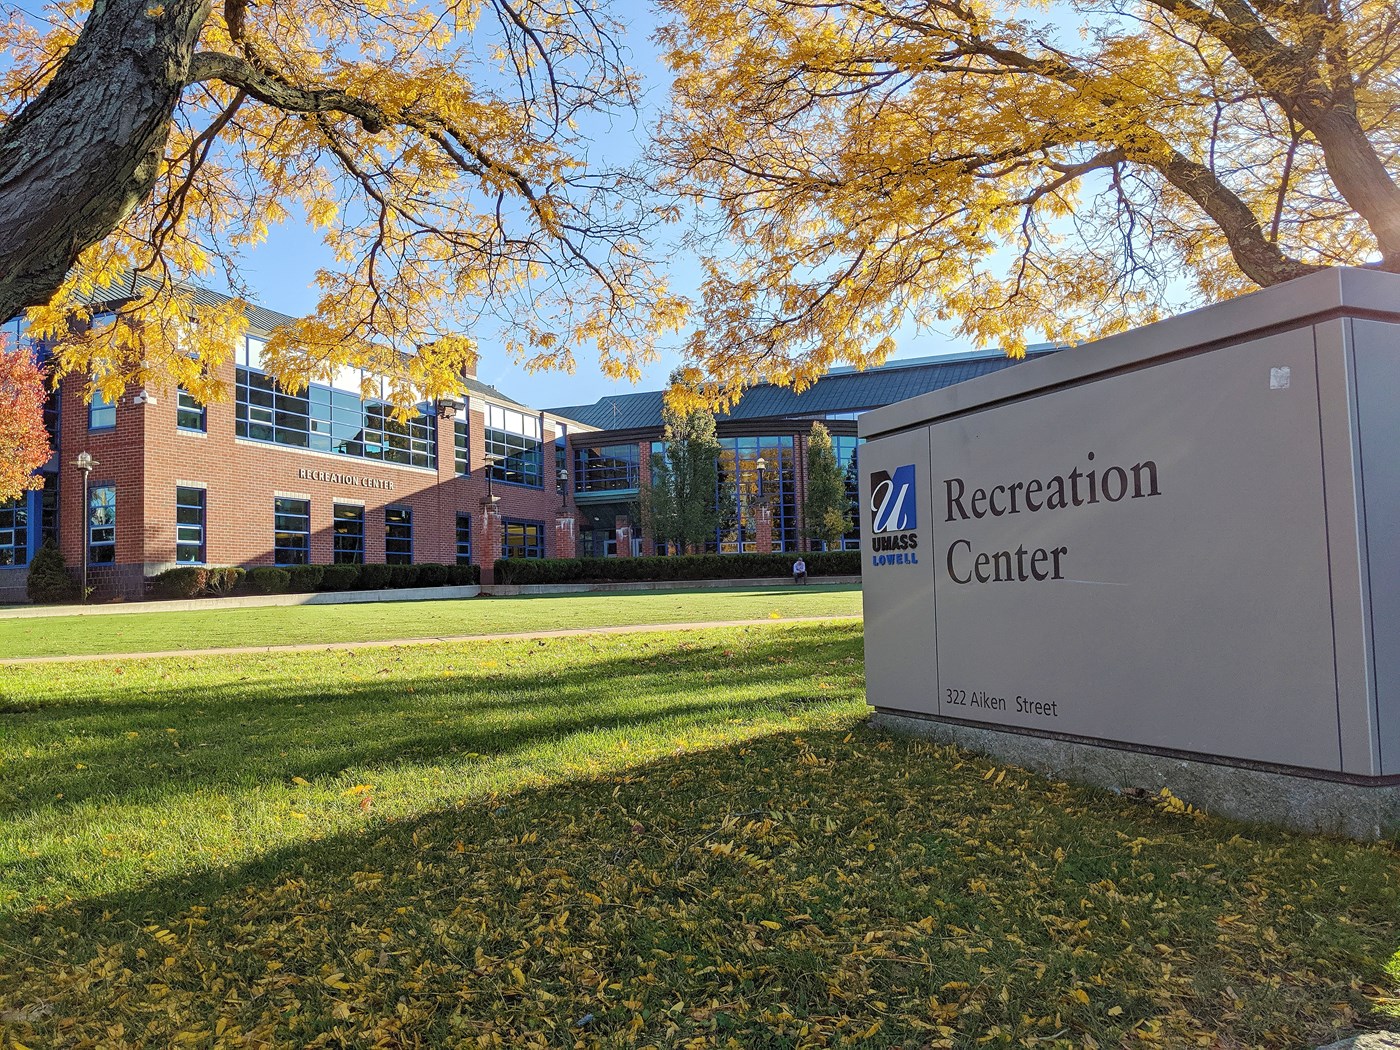 Exterior of Campus Recreation Center in fall with sign in foreground.